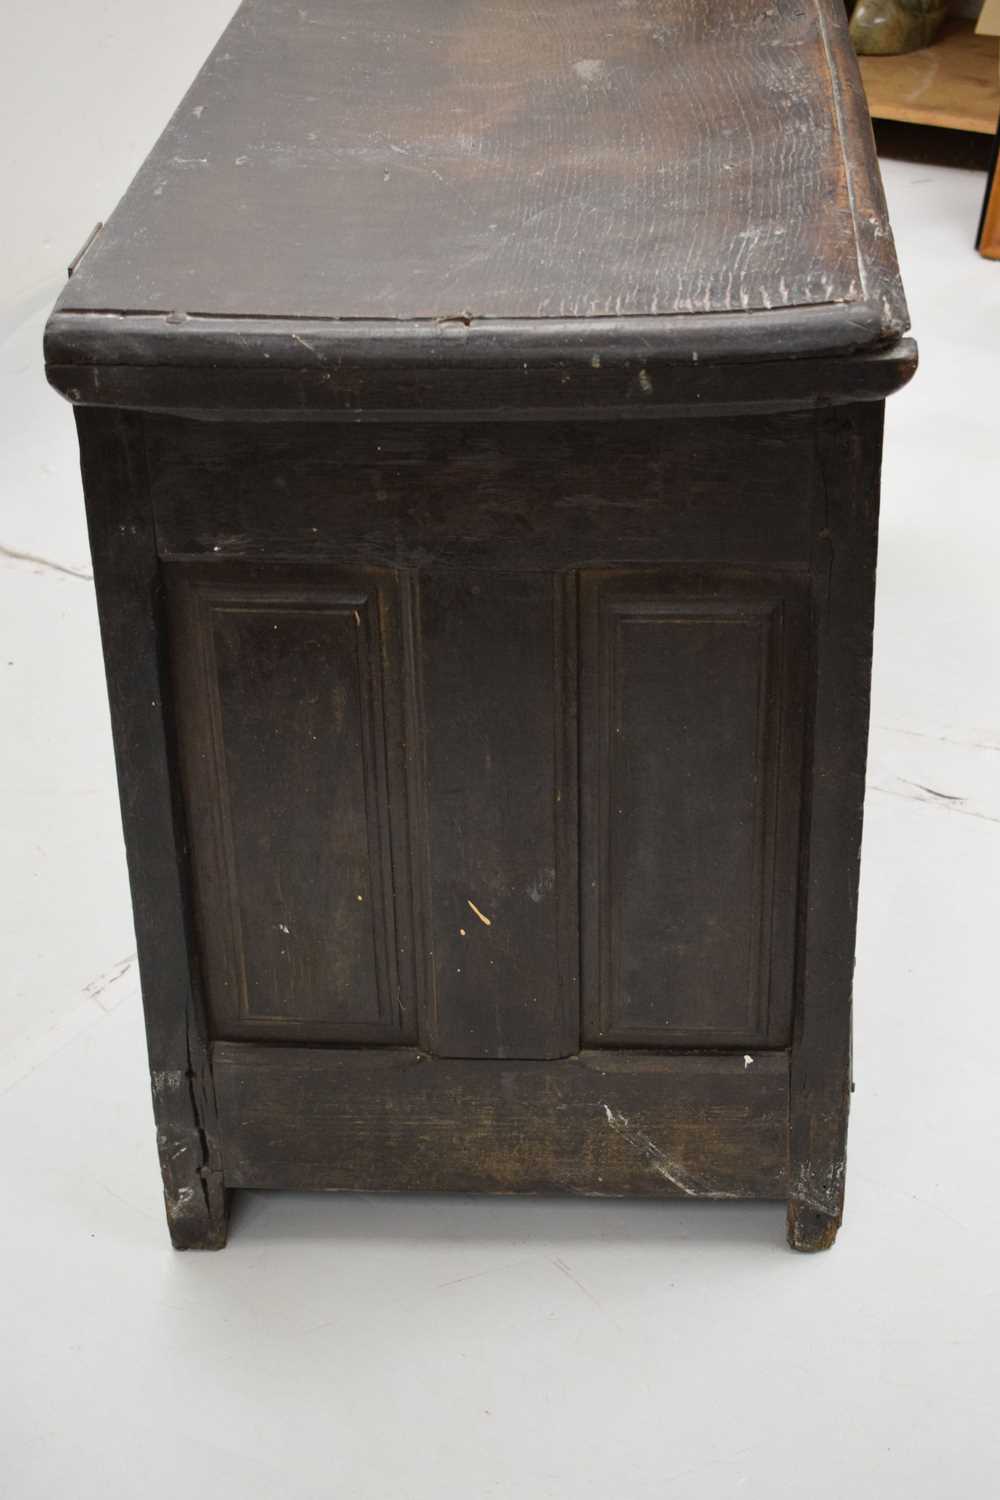 17th century oak chip-carved coffer or bedding chest - Image 8 of 21